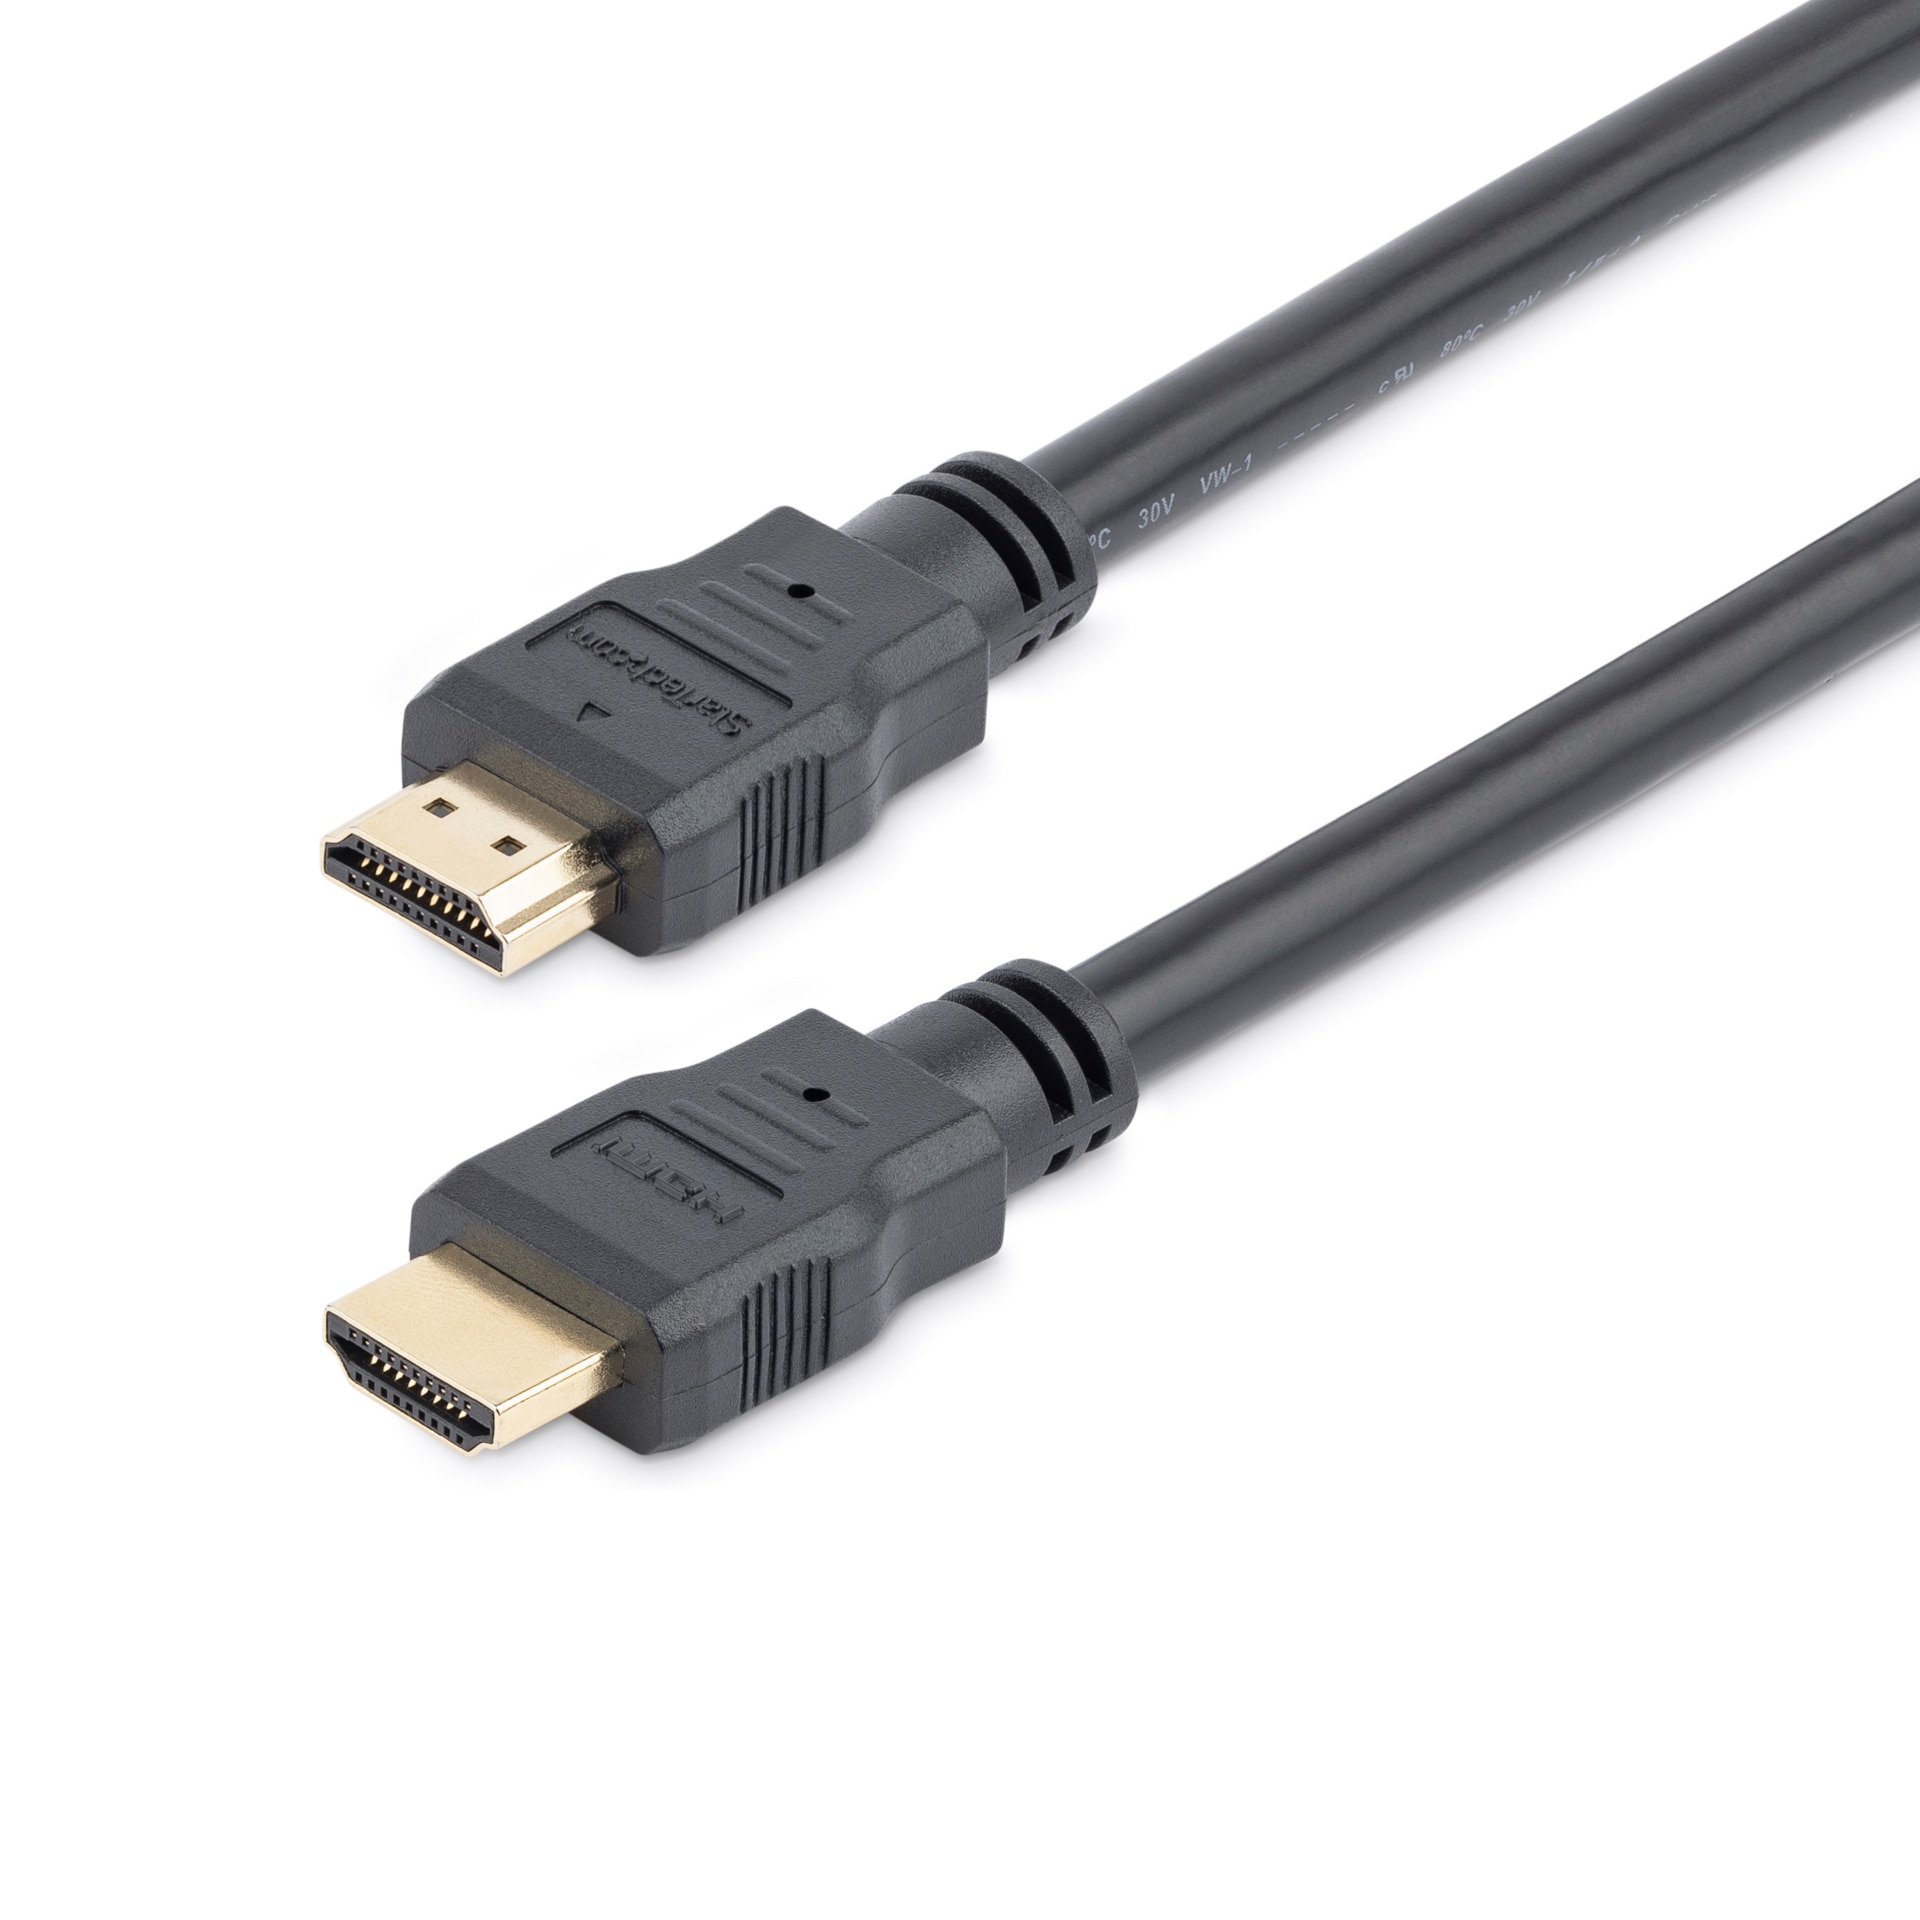 StarTech.com 16.4ft/5m HDMI Cable - 4K High Speed HDMI 1.4 Cable w/Ethernet